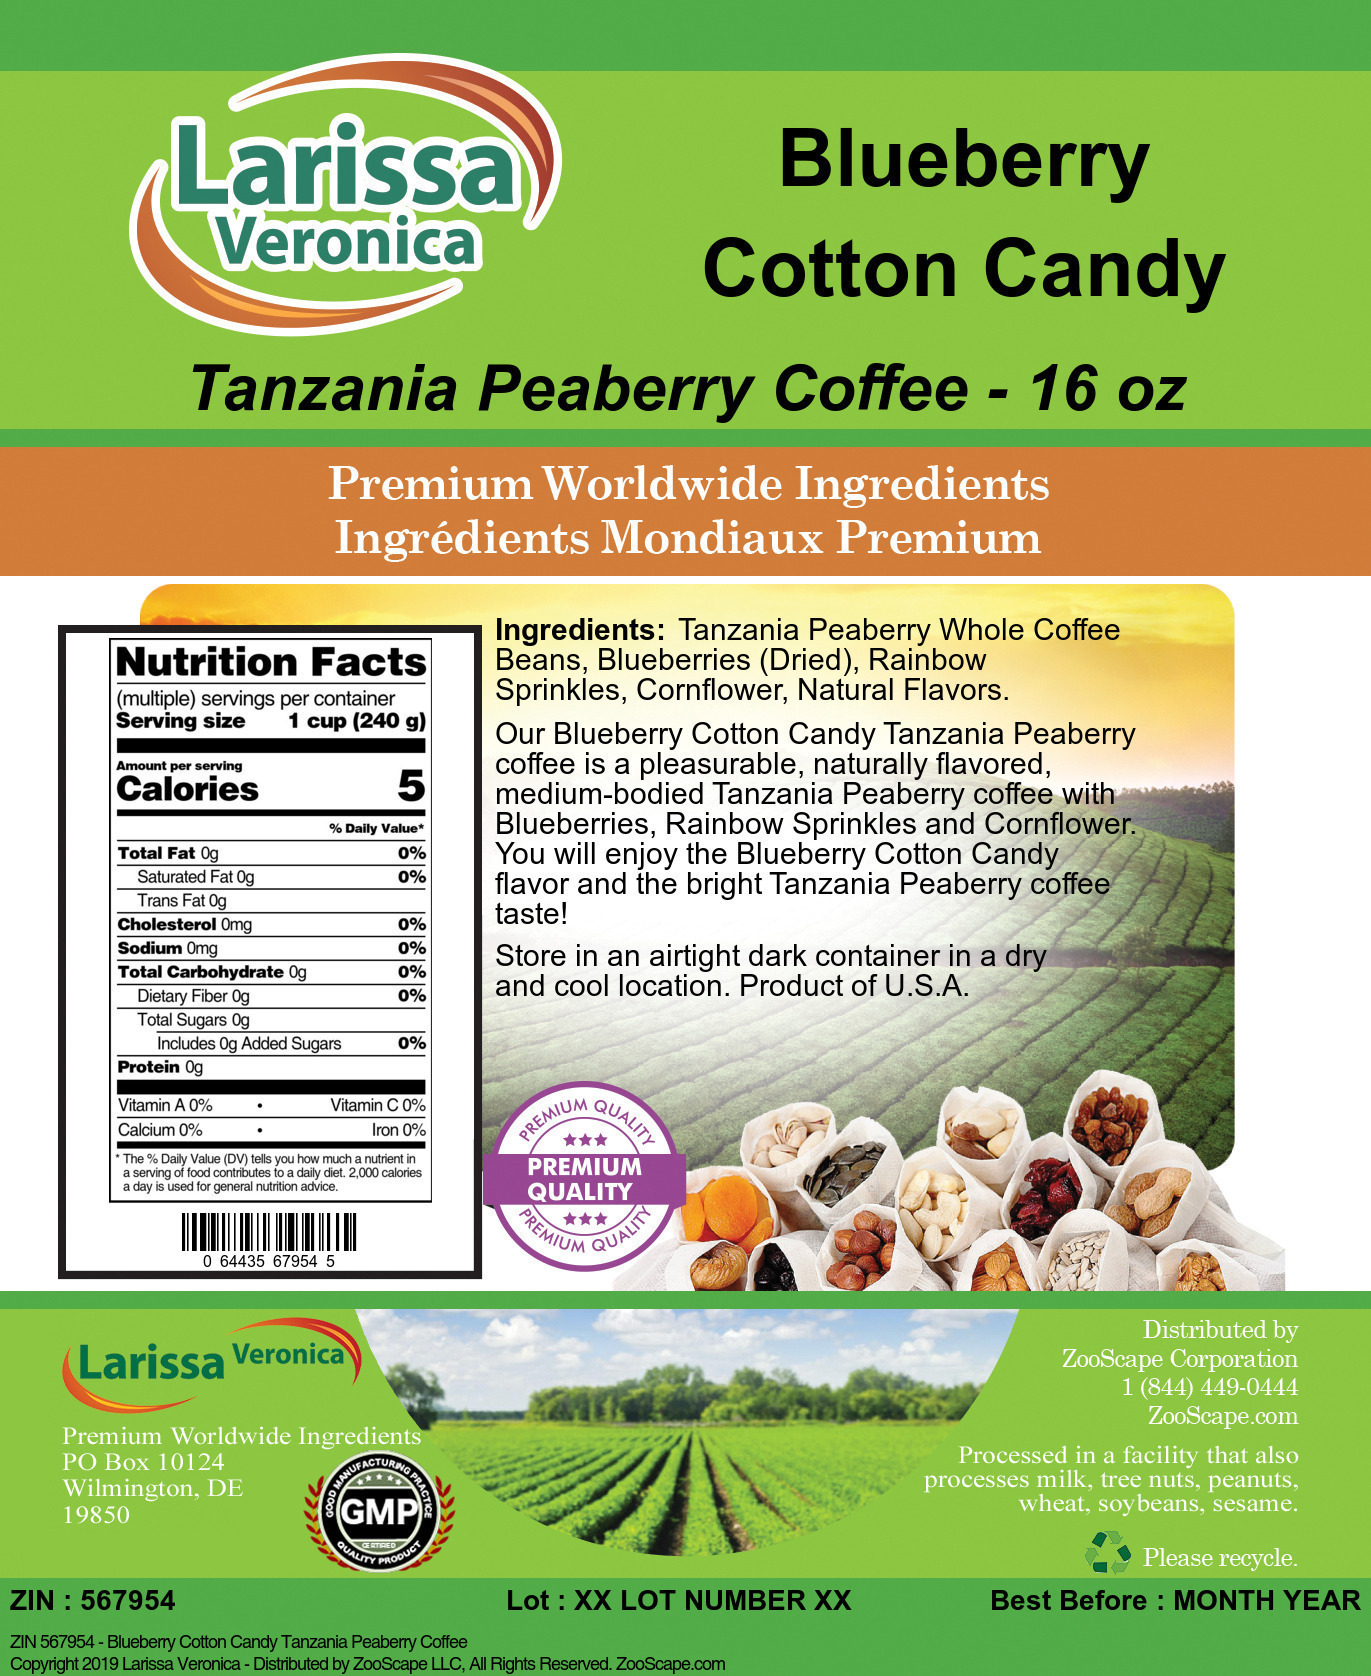 Blueberry Cotton Candy Tanzania Peaberry Coffee - Label